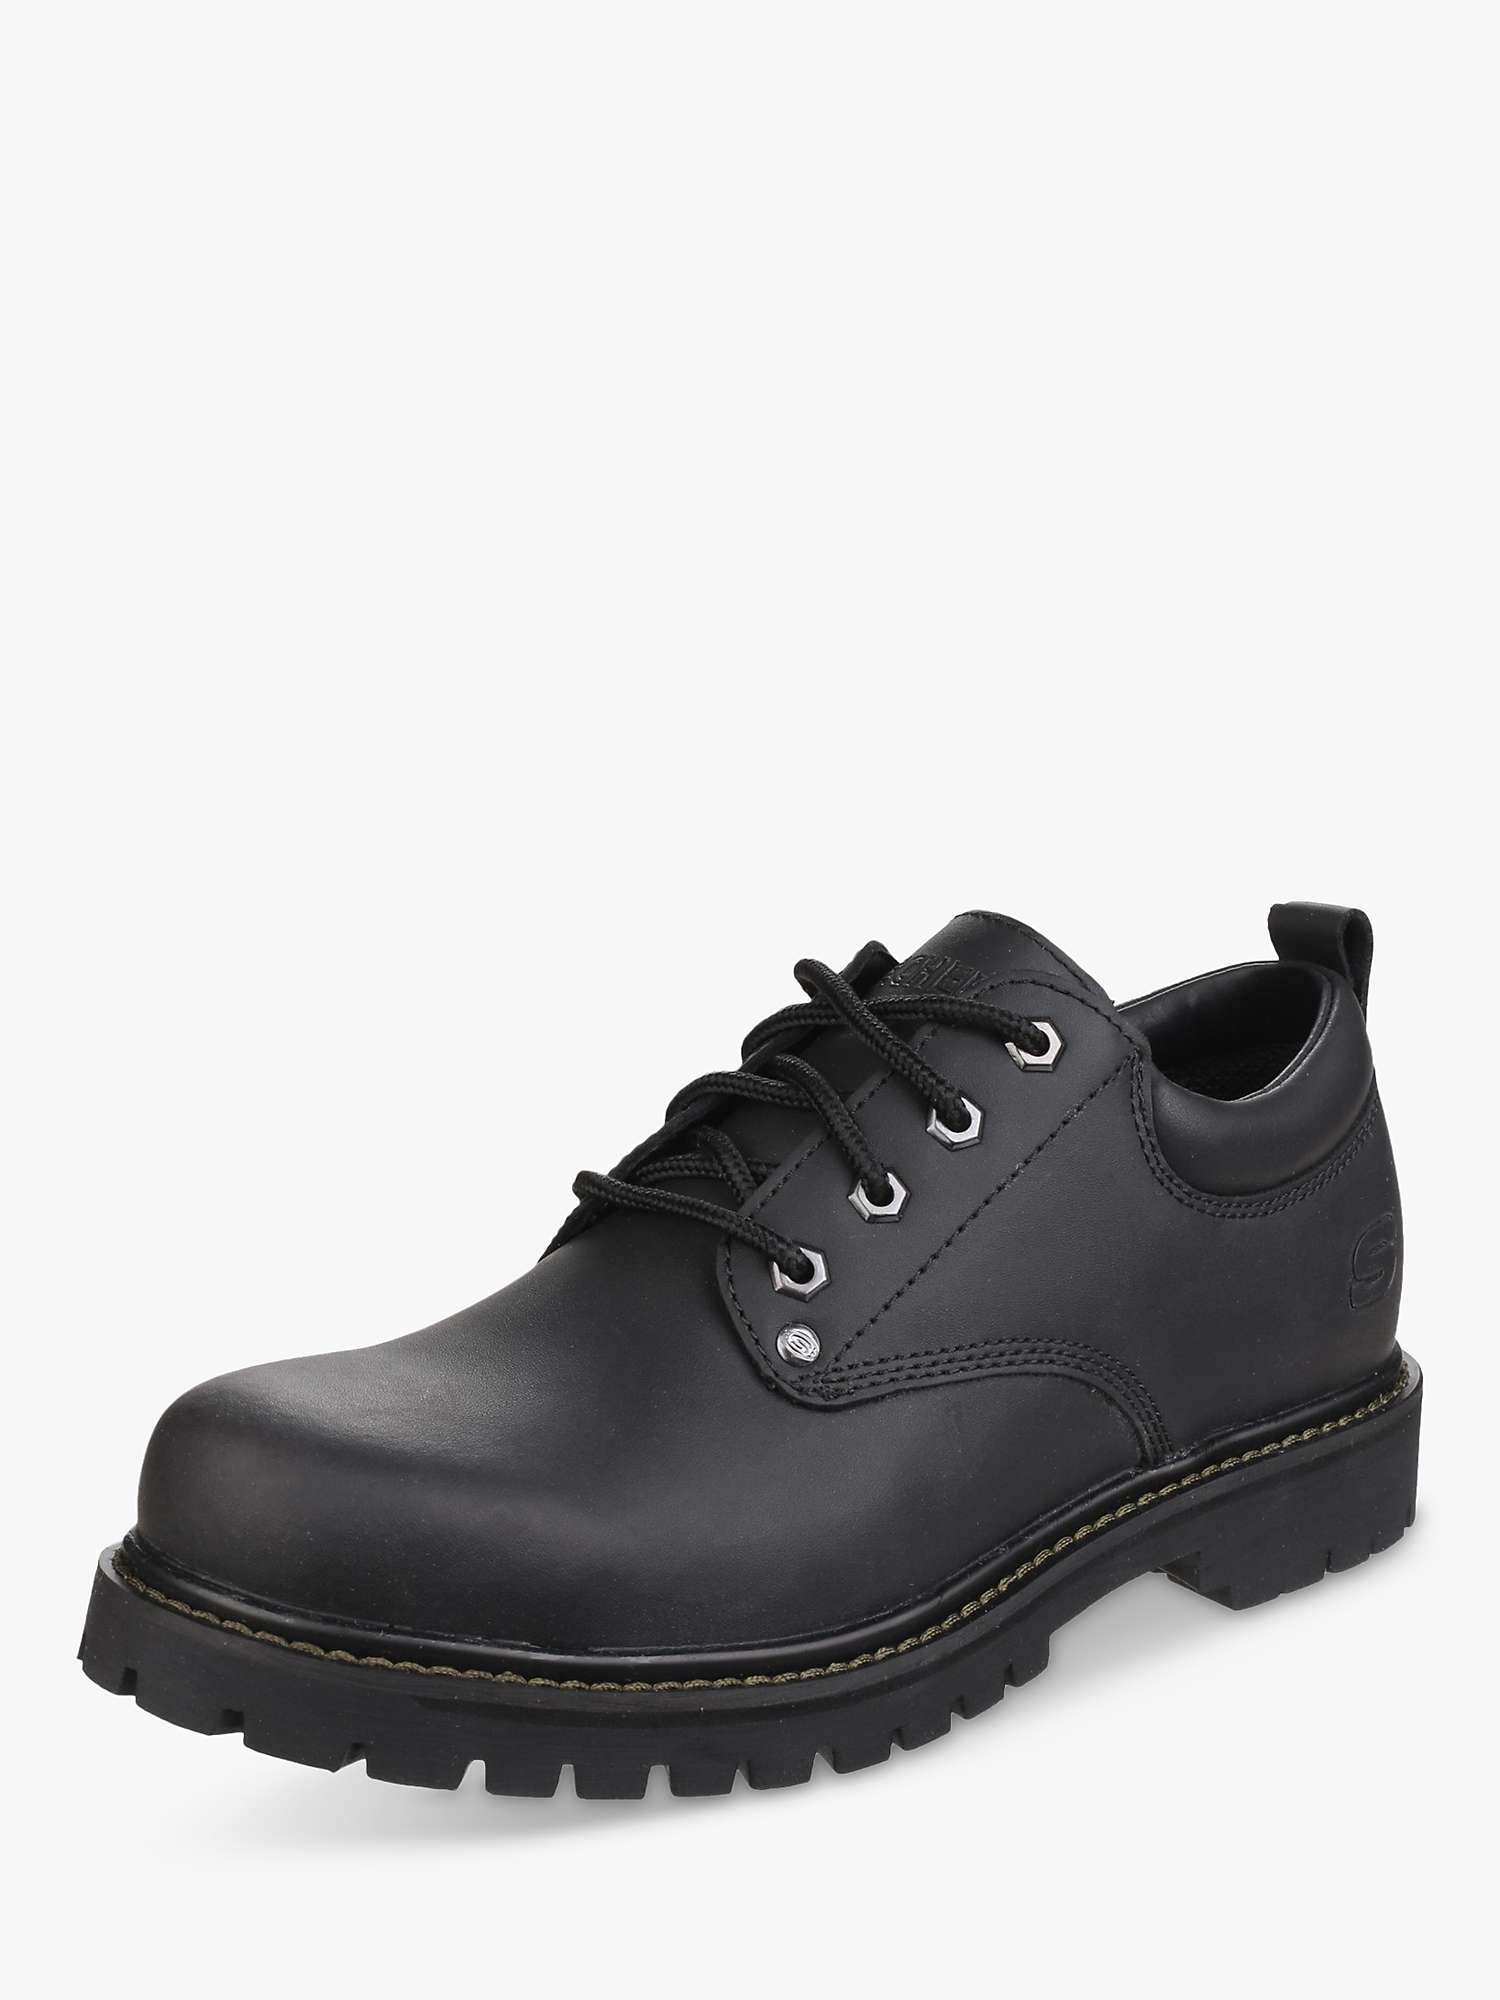 Buy Skechers Tom Cats Leather Lace Up Oxford Shoes Online at johnlewis.com